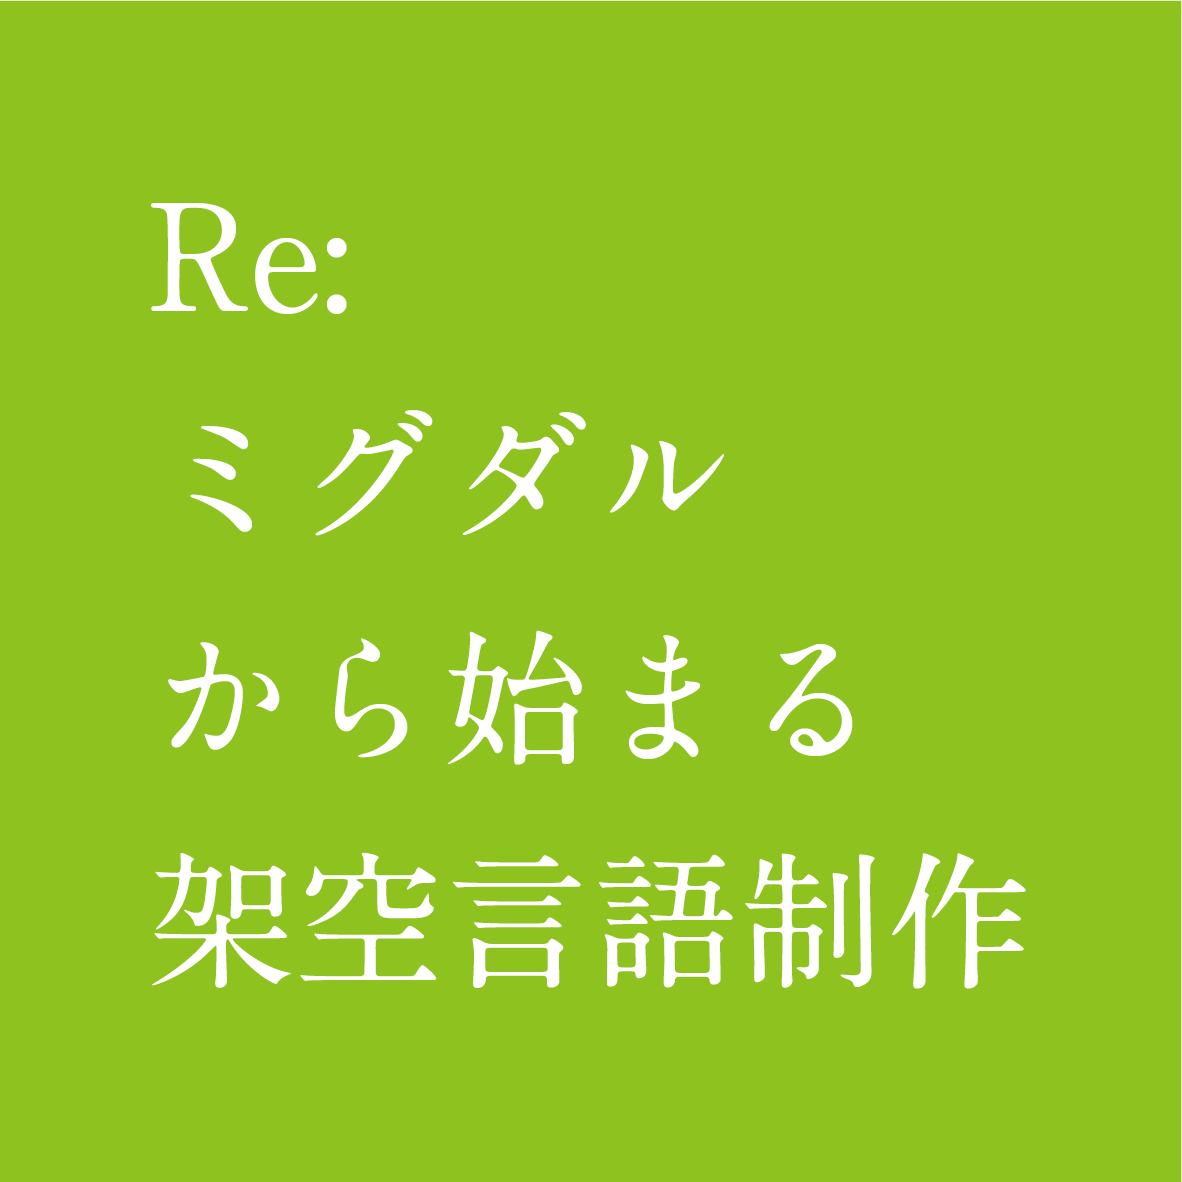 Cover image for Re: ミグダルから始まる架空言語制作